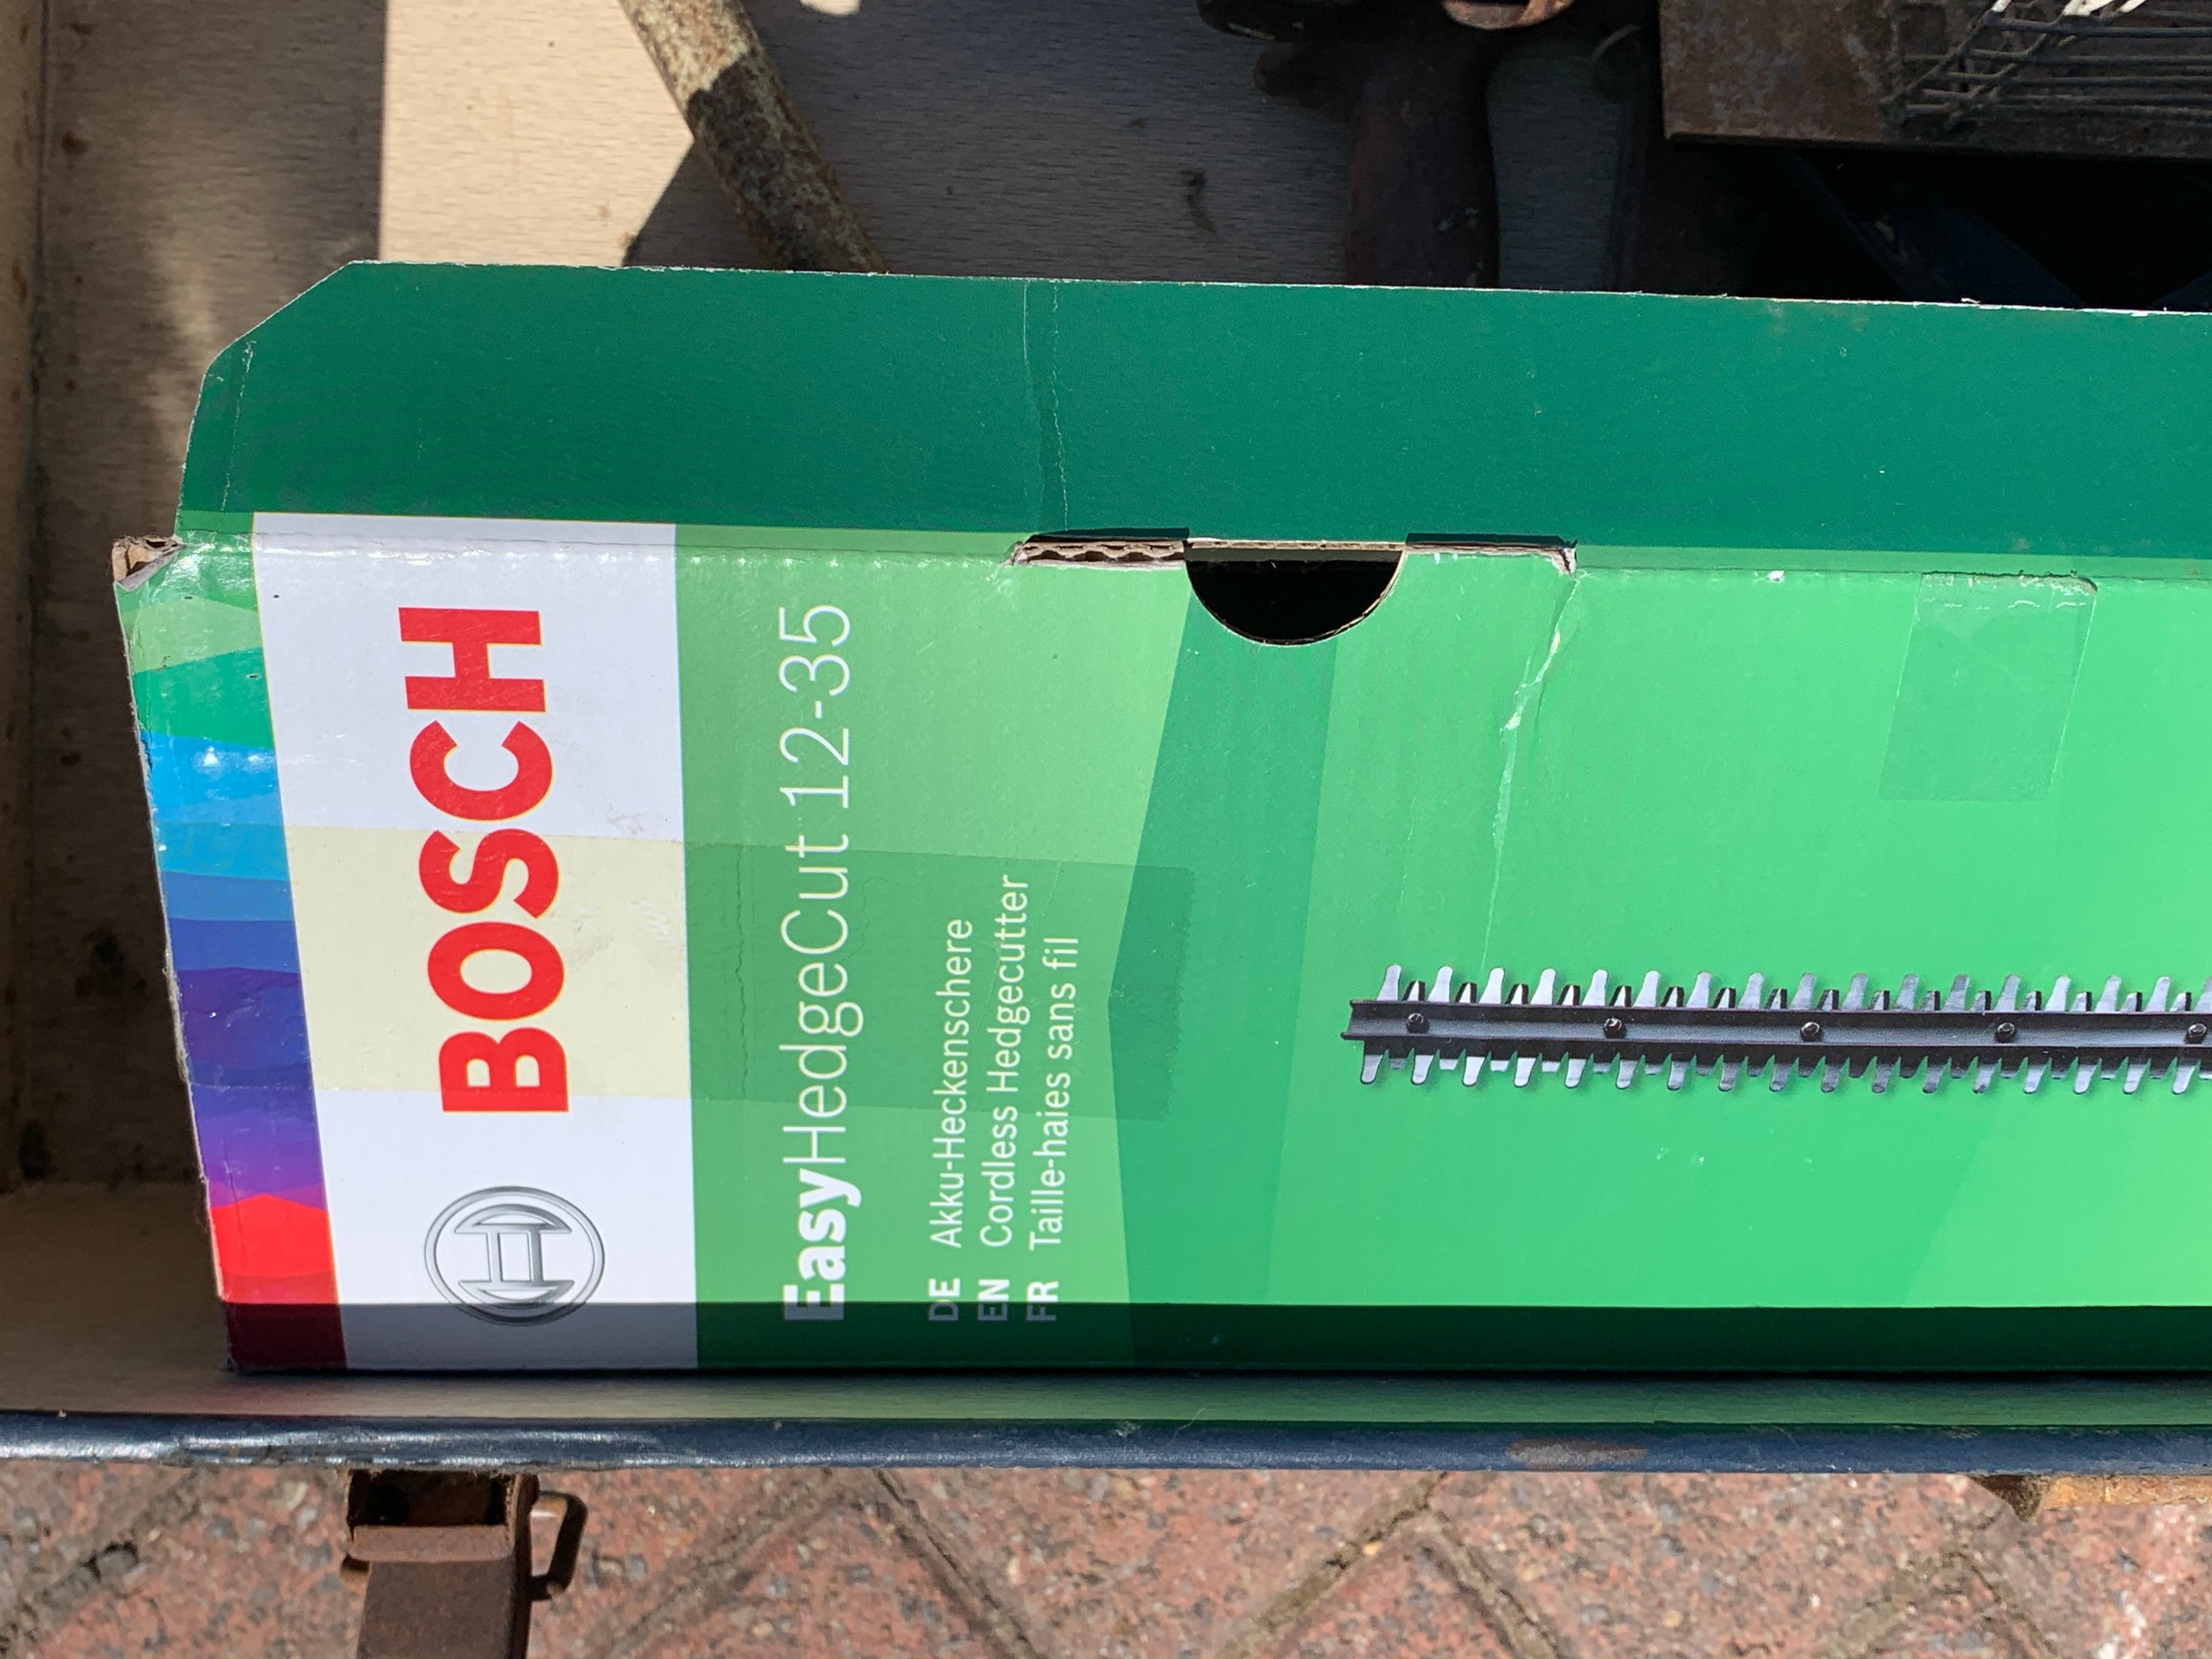 A Bosch Easy Hedge Cut 12-35 hedge trimmer, boxed, together with hand saws and a animal trap, in a - Image 3 of 3